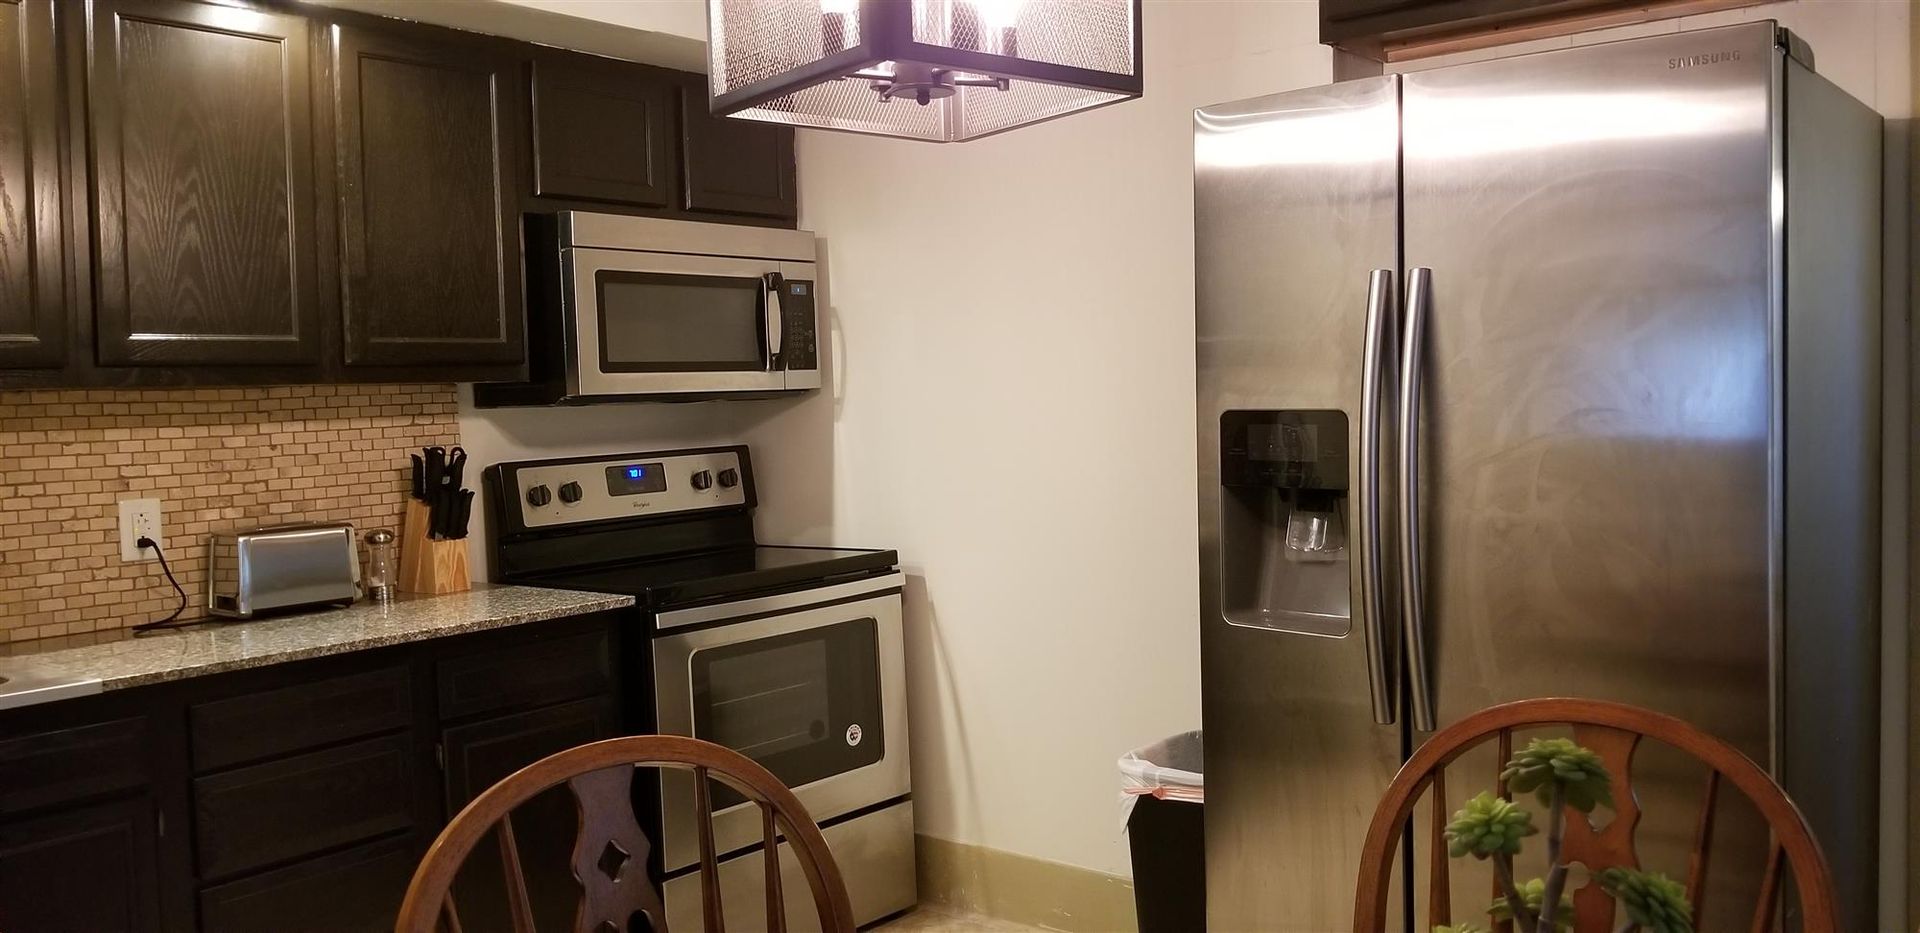 A kitchen with a stainless steel refrigerator , stove , microwave , and chairs.